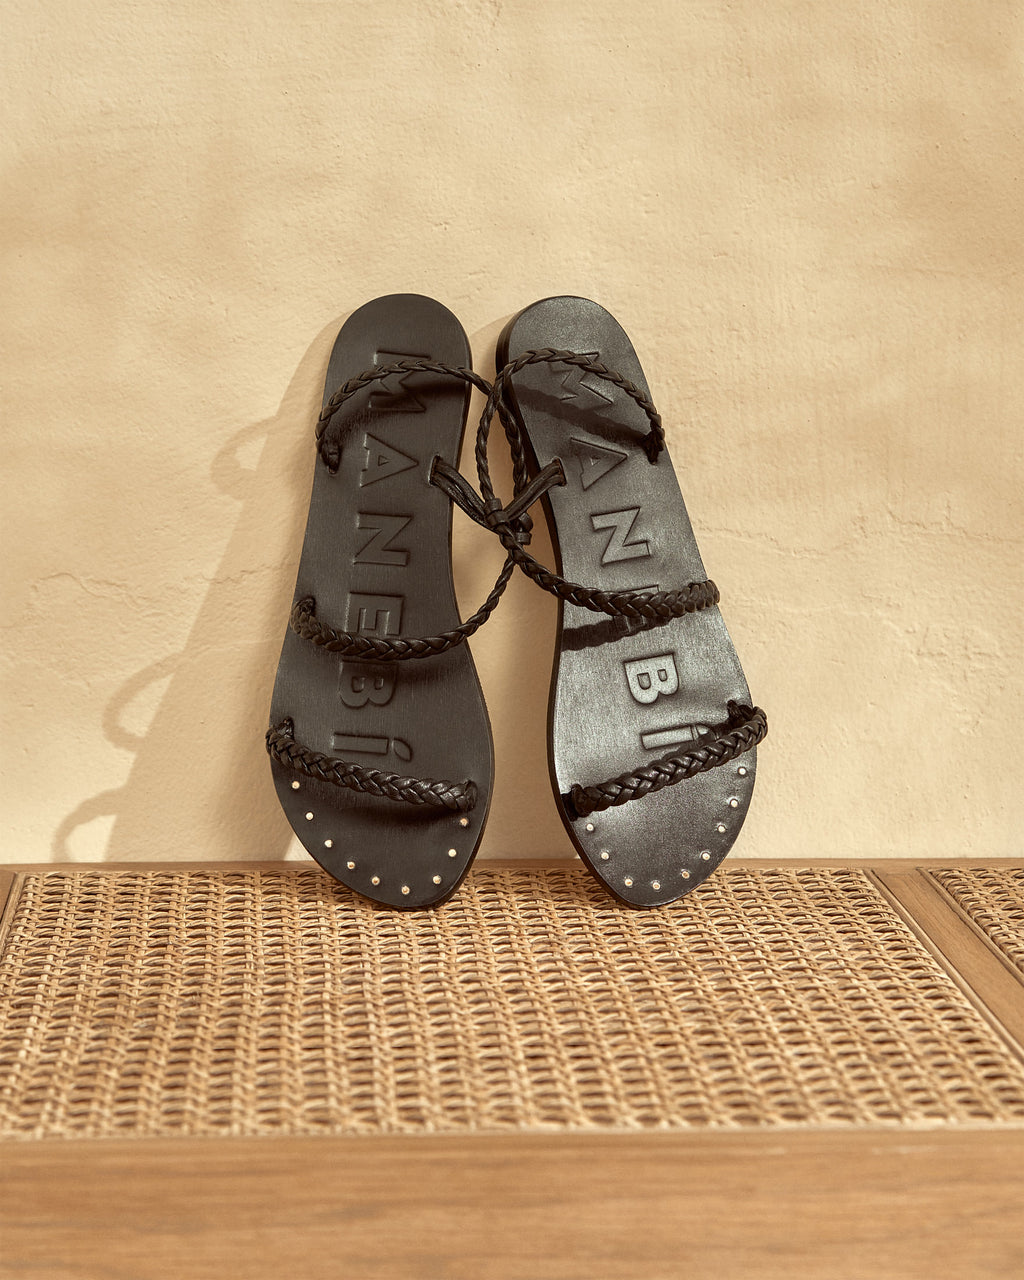 Leather Sandals - Canyon - Black on Tone